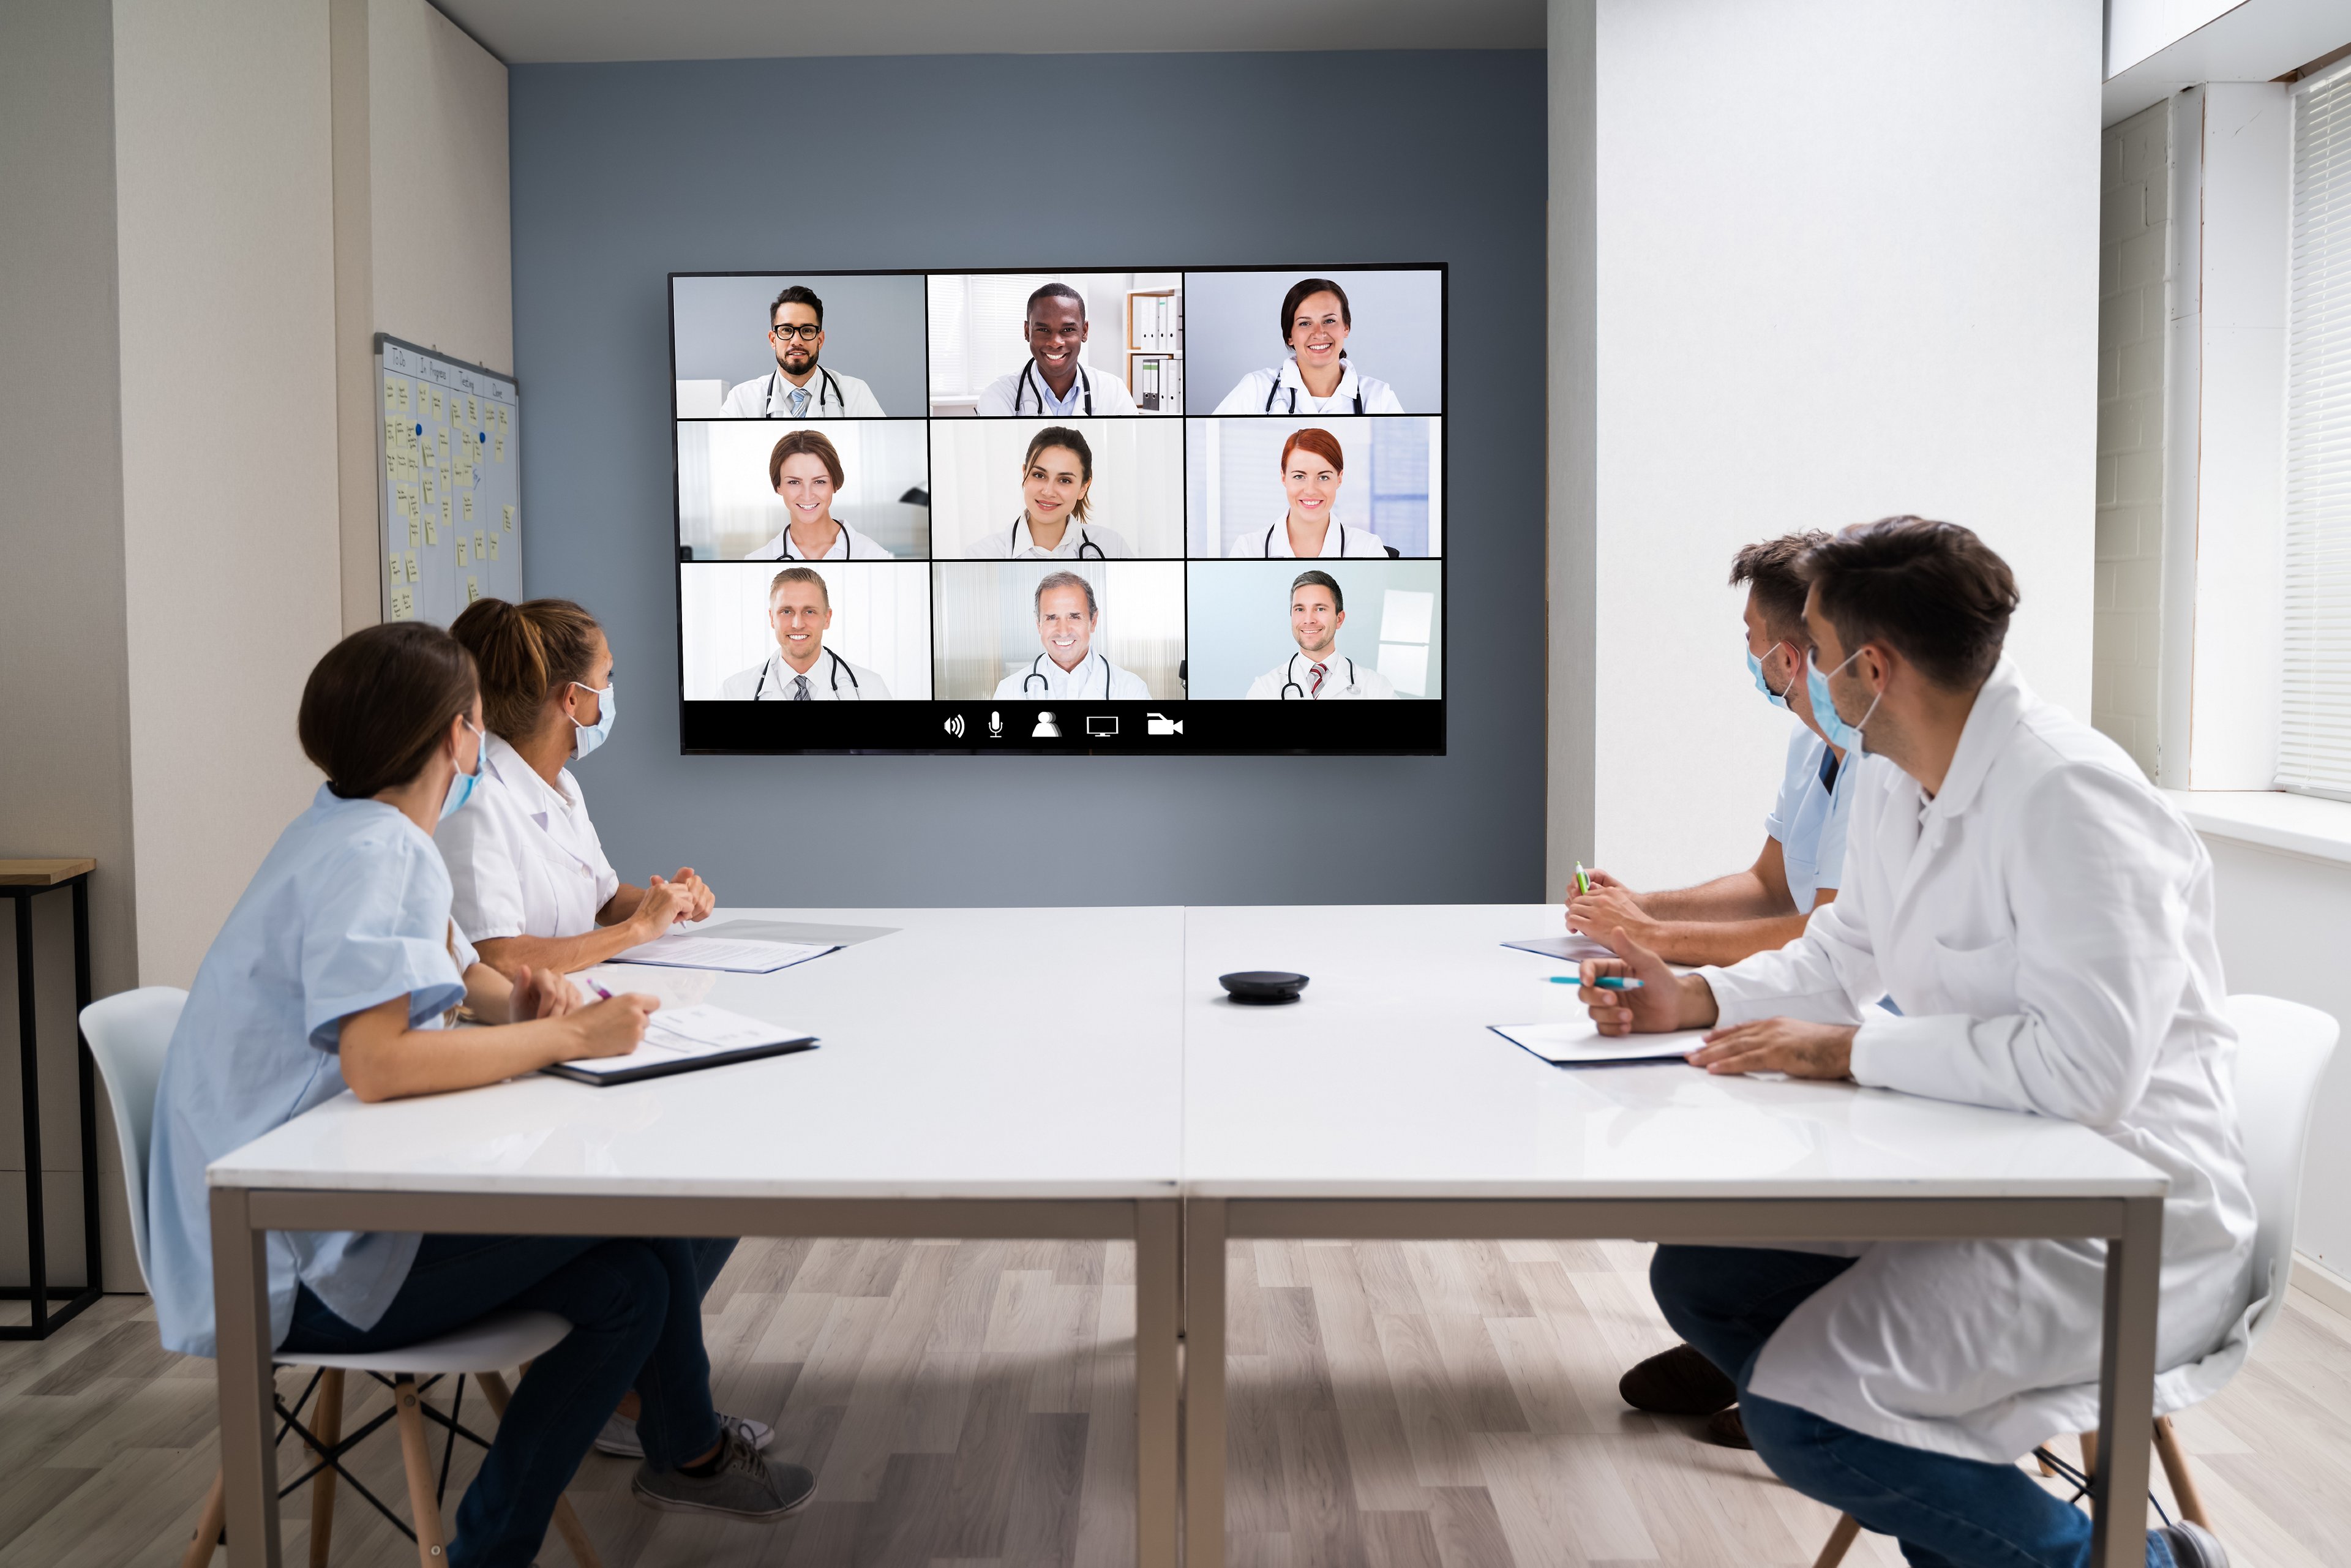 BenQ Smart Signage ST series enable healthcare organization to conduct safe and efficient meetings.